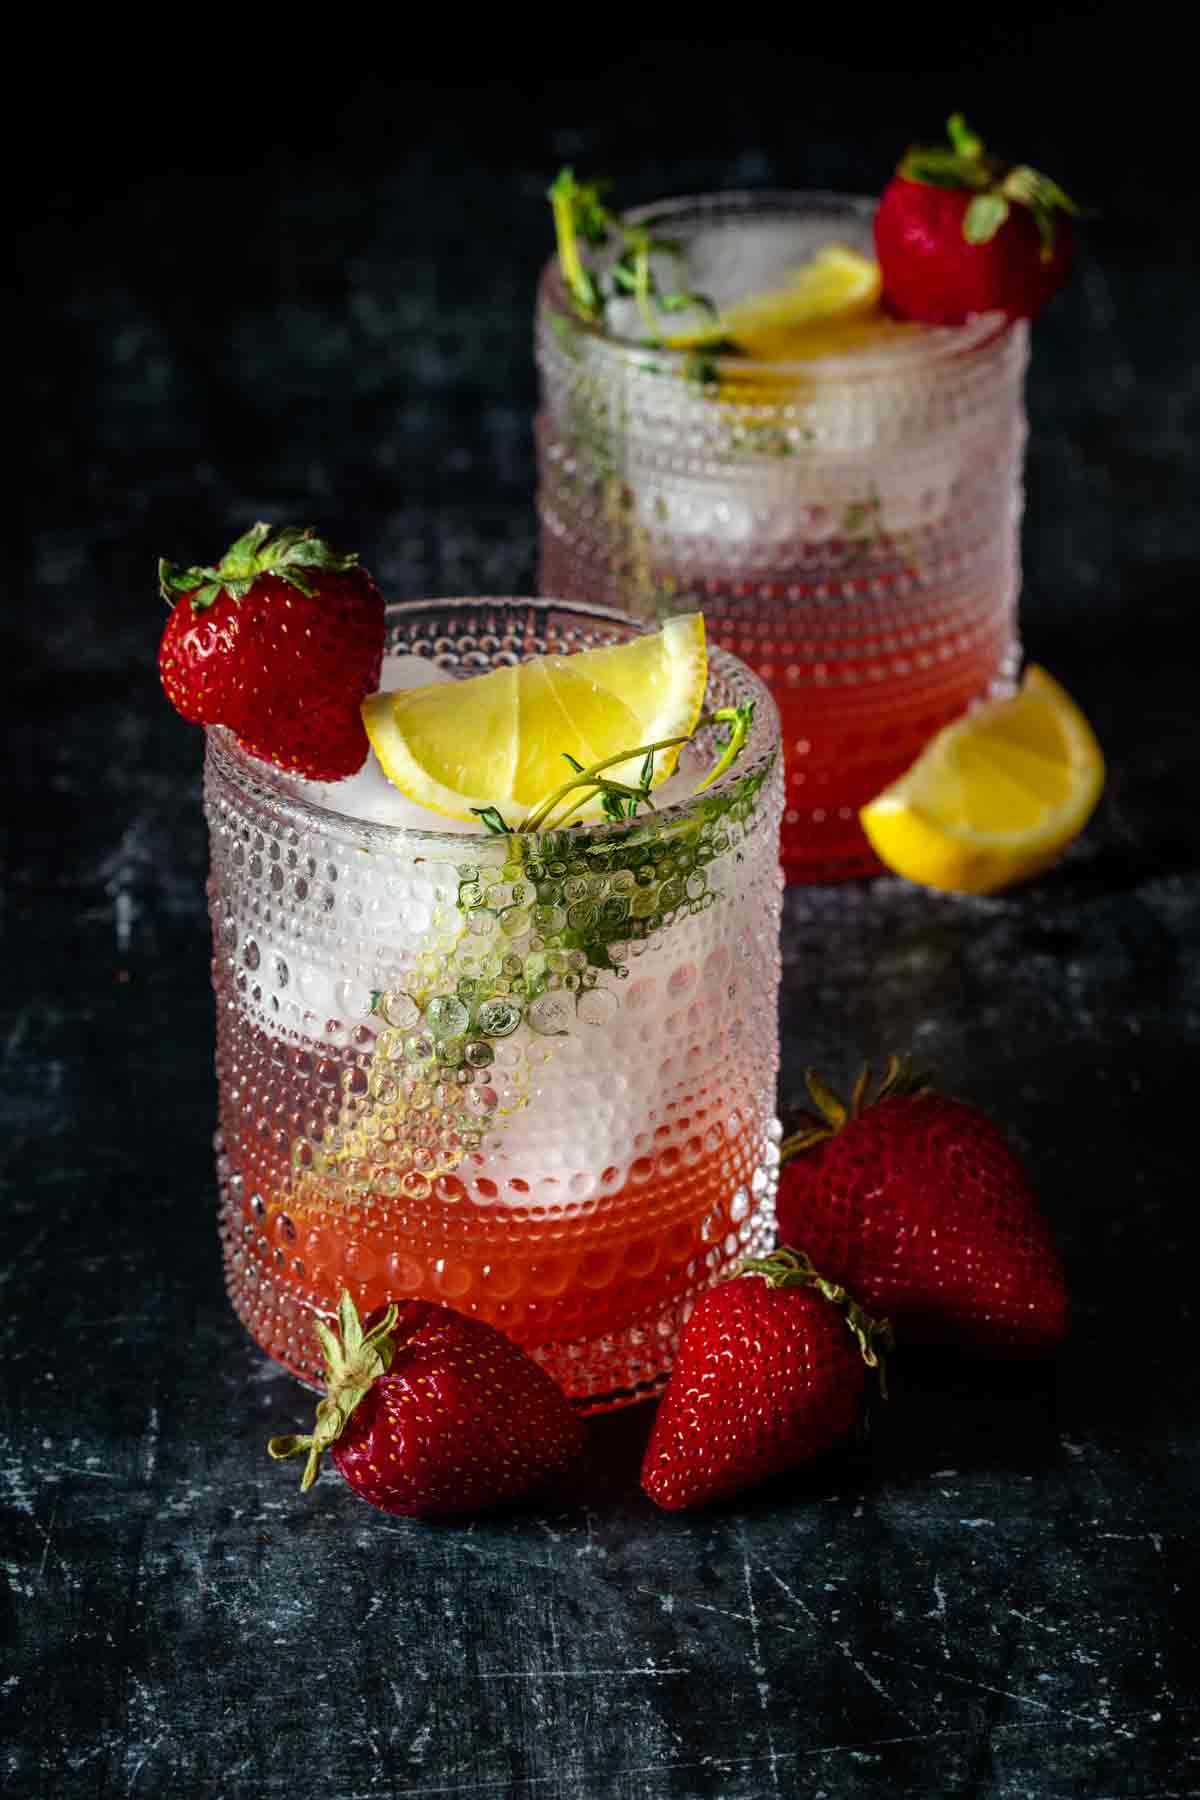 Two textured cocktail glassed with a red drink and ice topped with thyme, lemon and a strawberry.